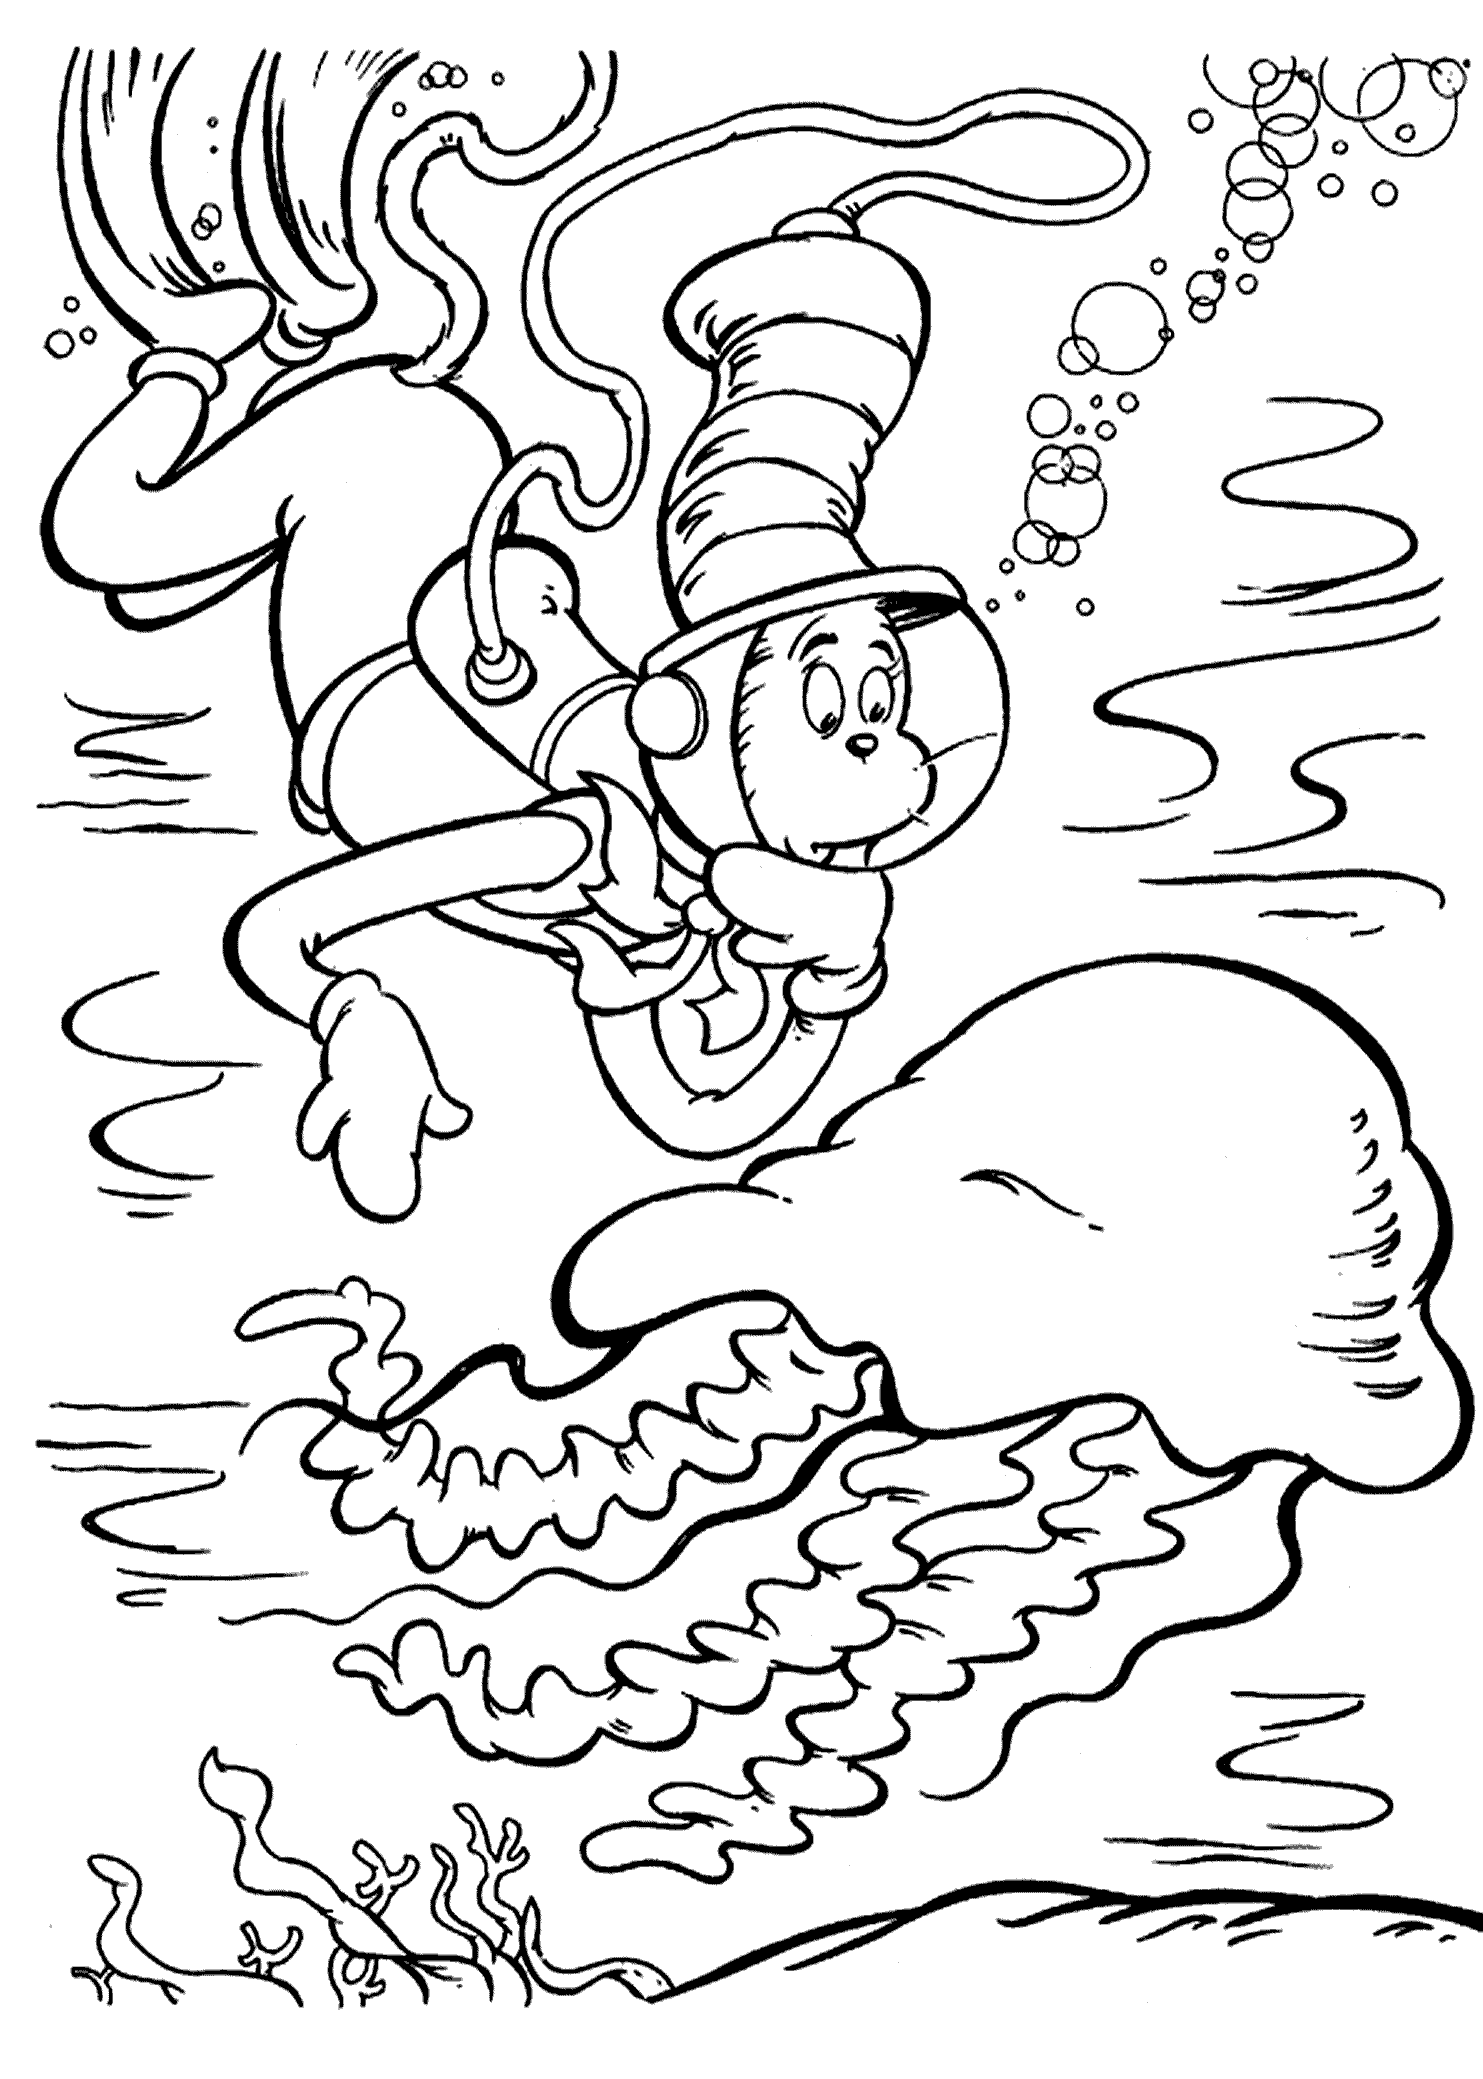 wacky-wednesday-dr-seuss-coloring-page-coloring-home